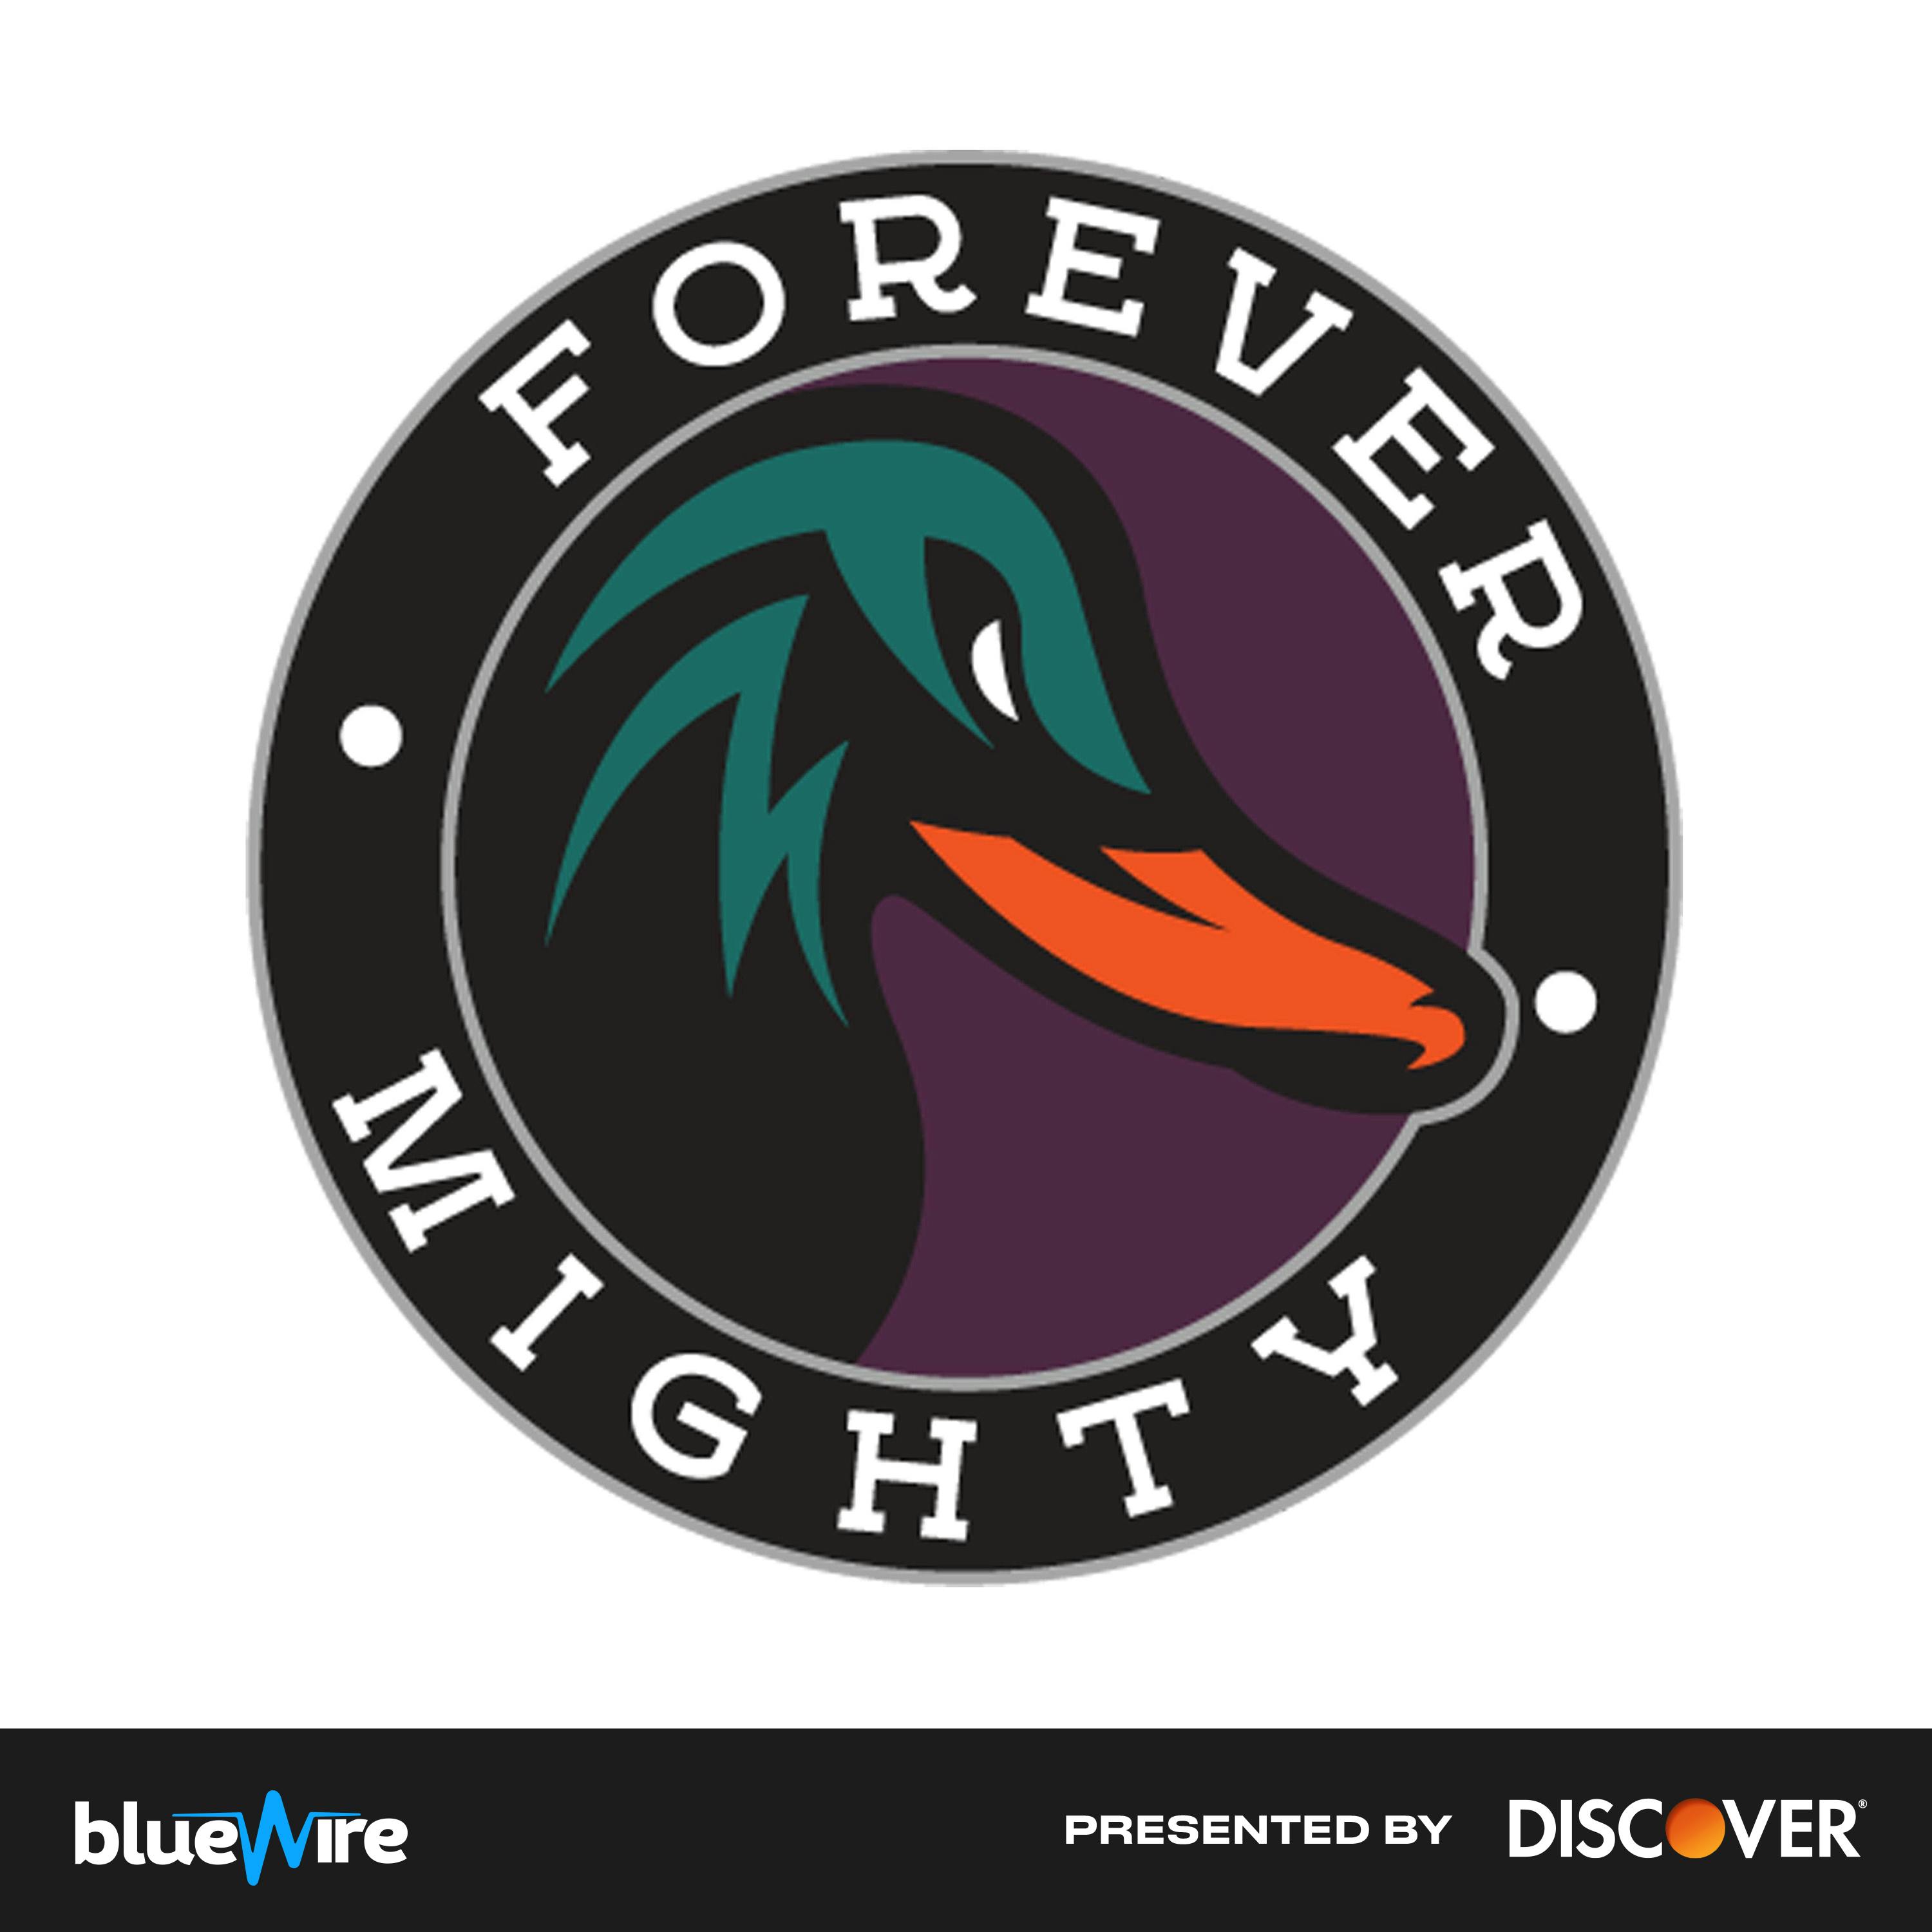 Troy Terry Is An All Star, Lukas Dostal Shines, Ducks Start GM Interviews - Forever Mighty Podcast